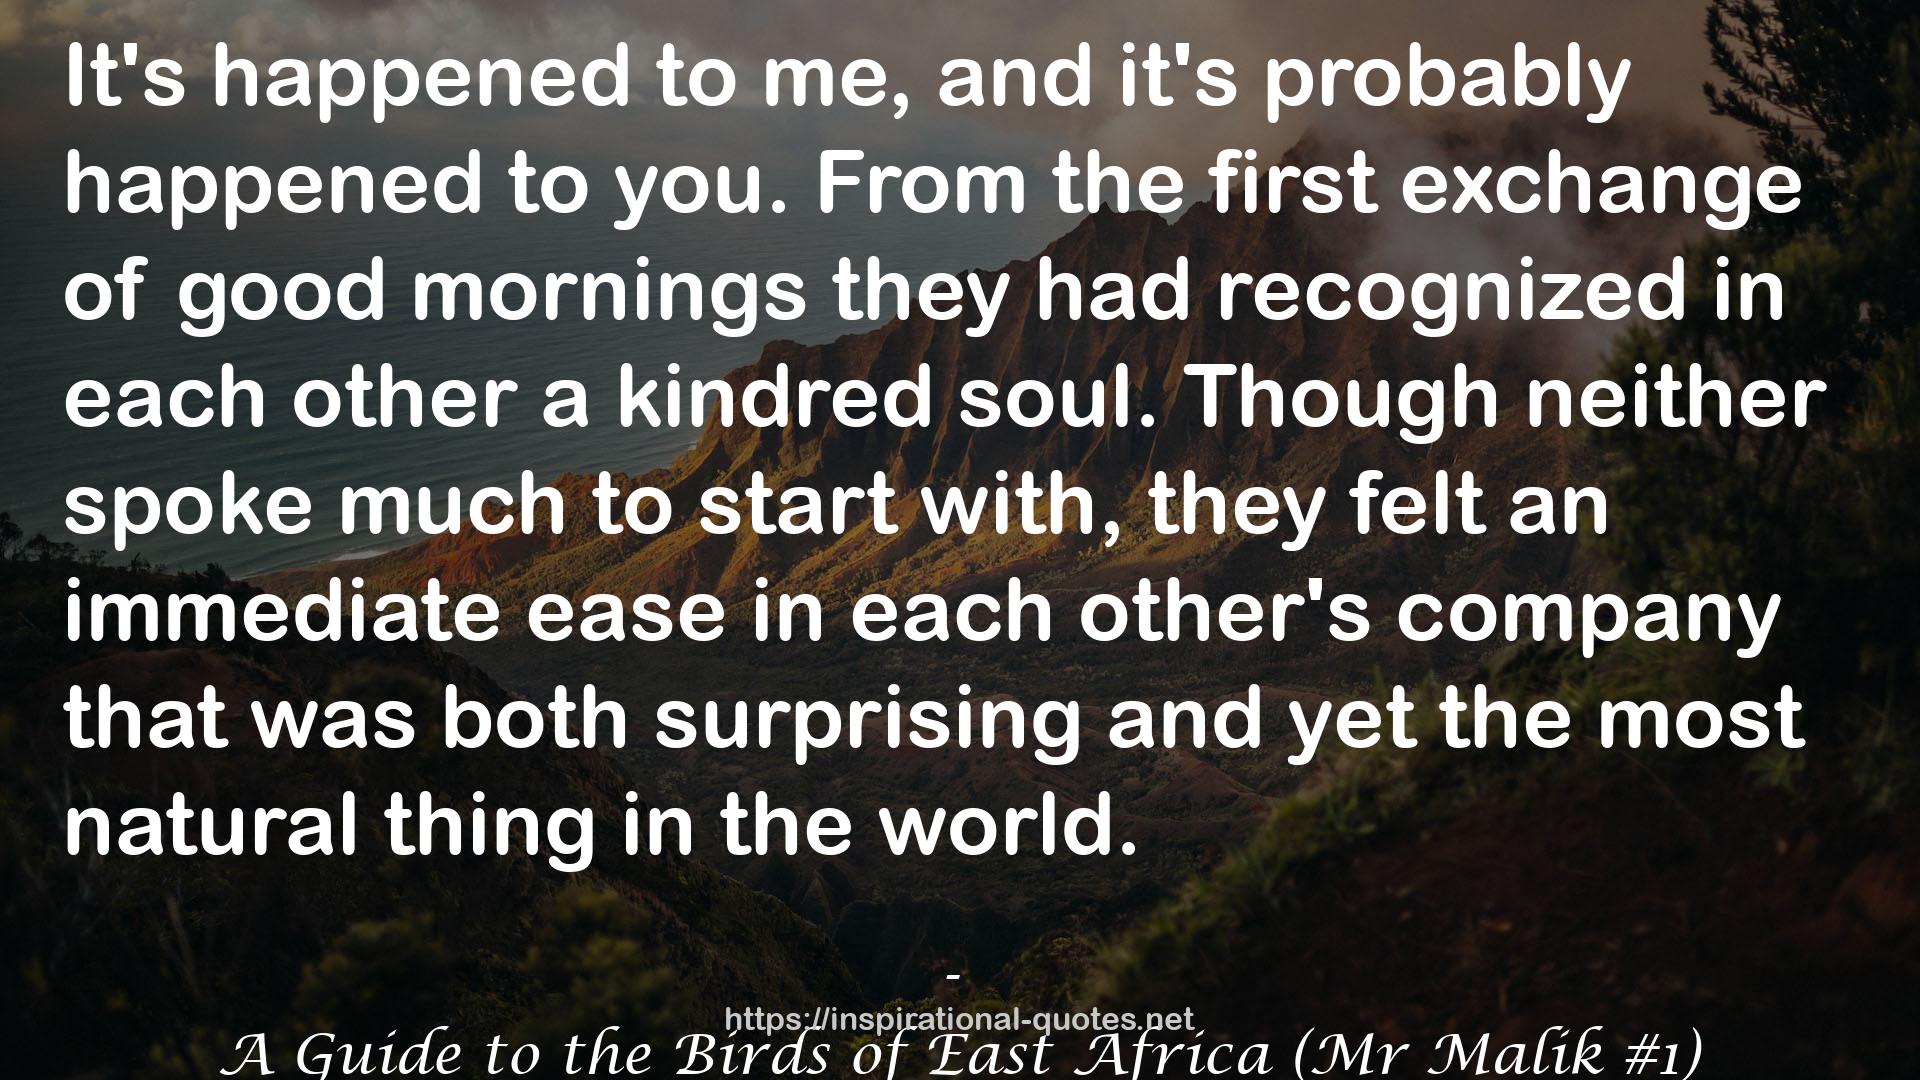 A Guide to the Birds of East Africa (Mr Malik #1) QUOTES